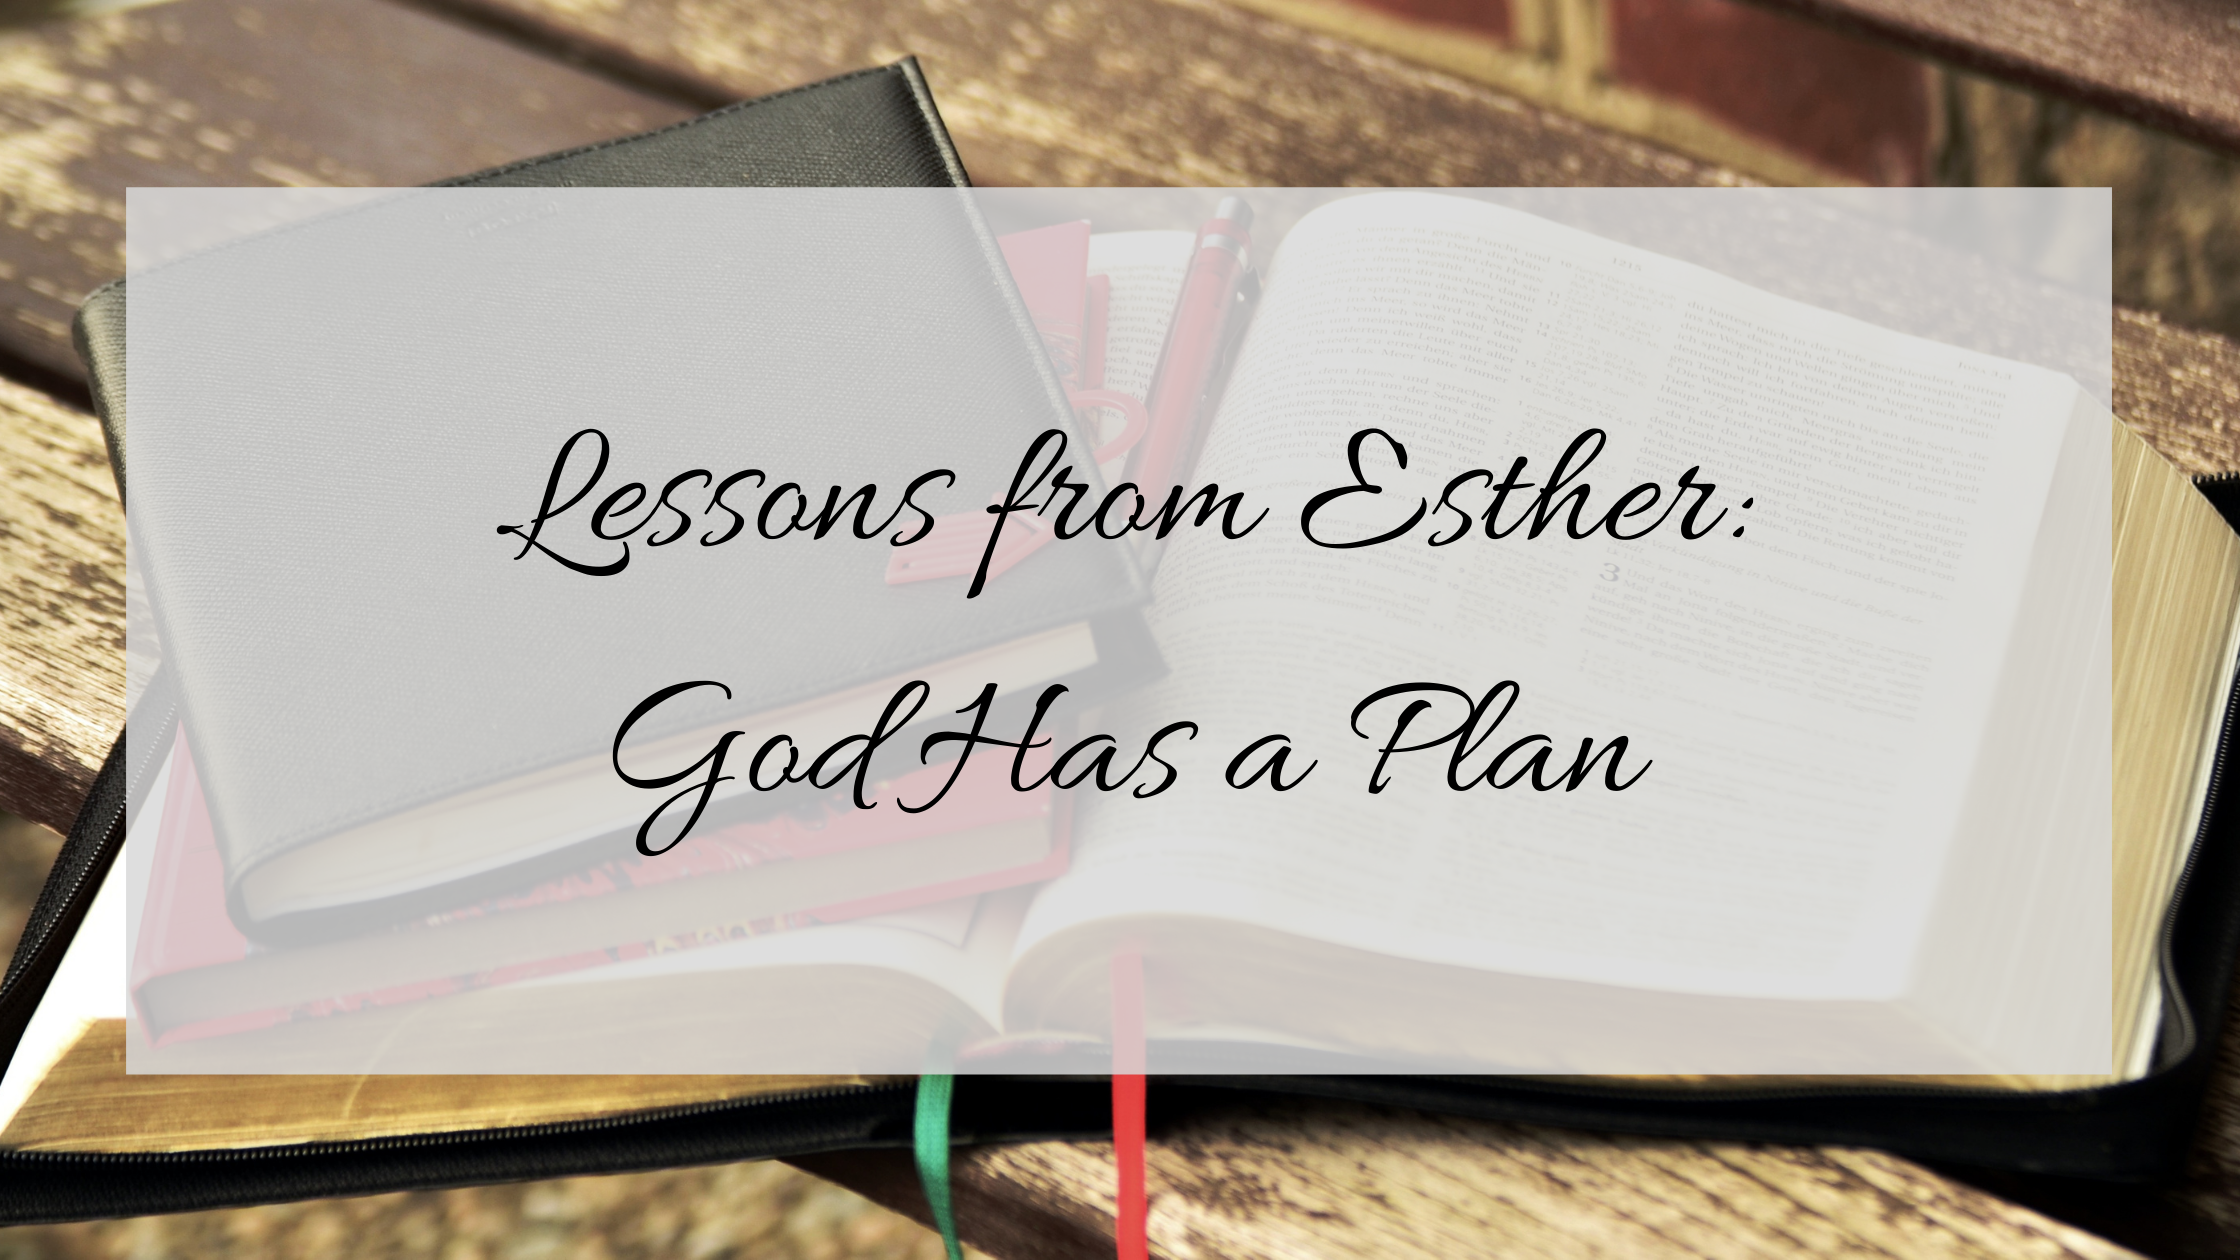 Lessons from Esther: God Has a Plan